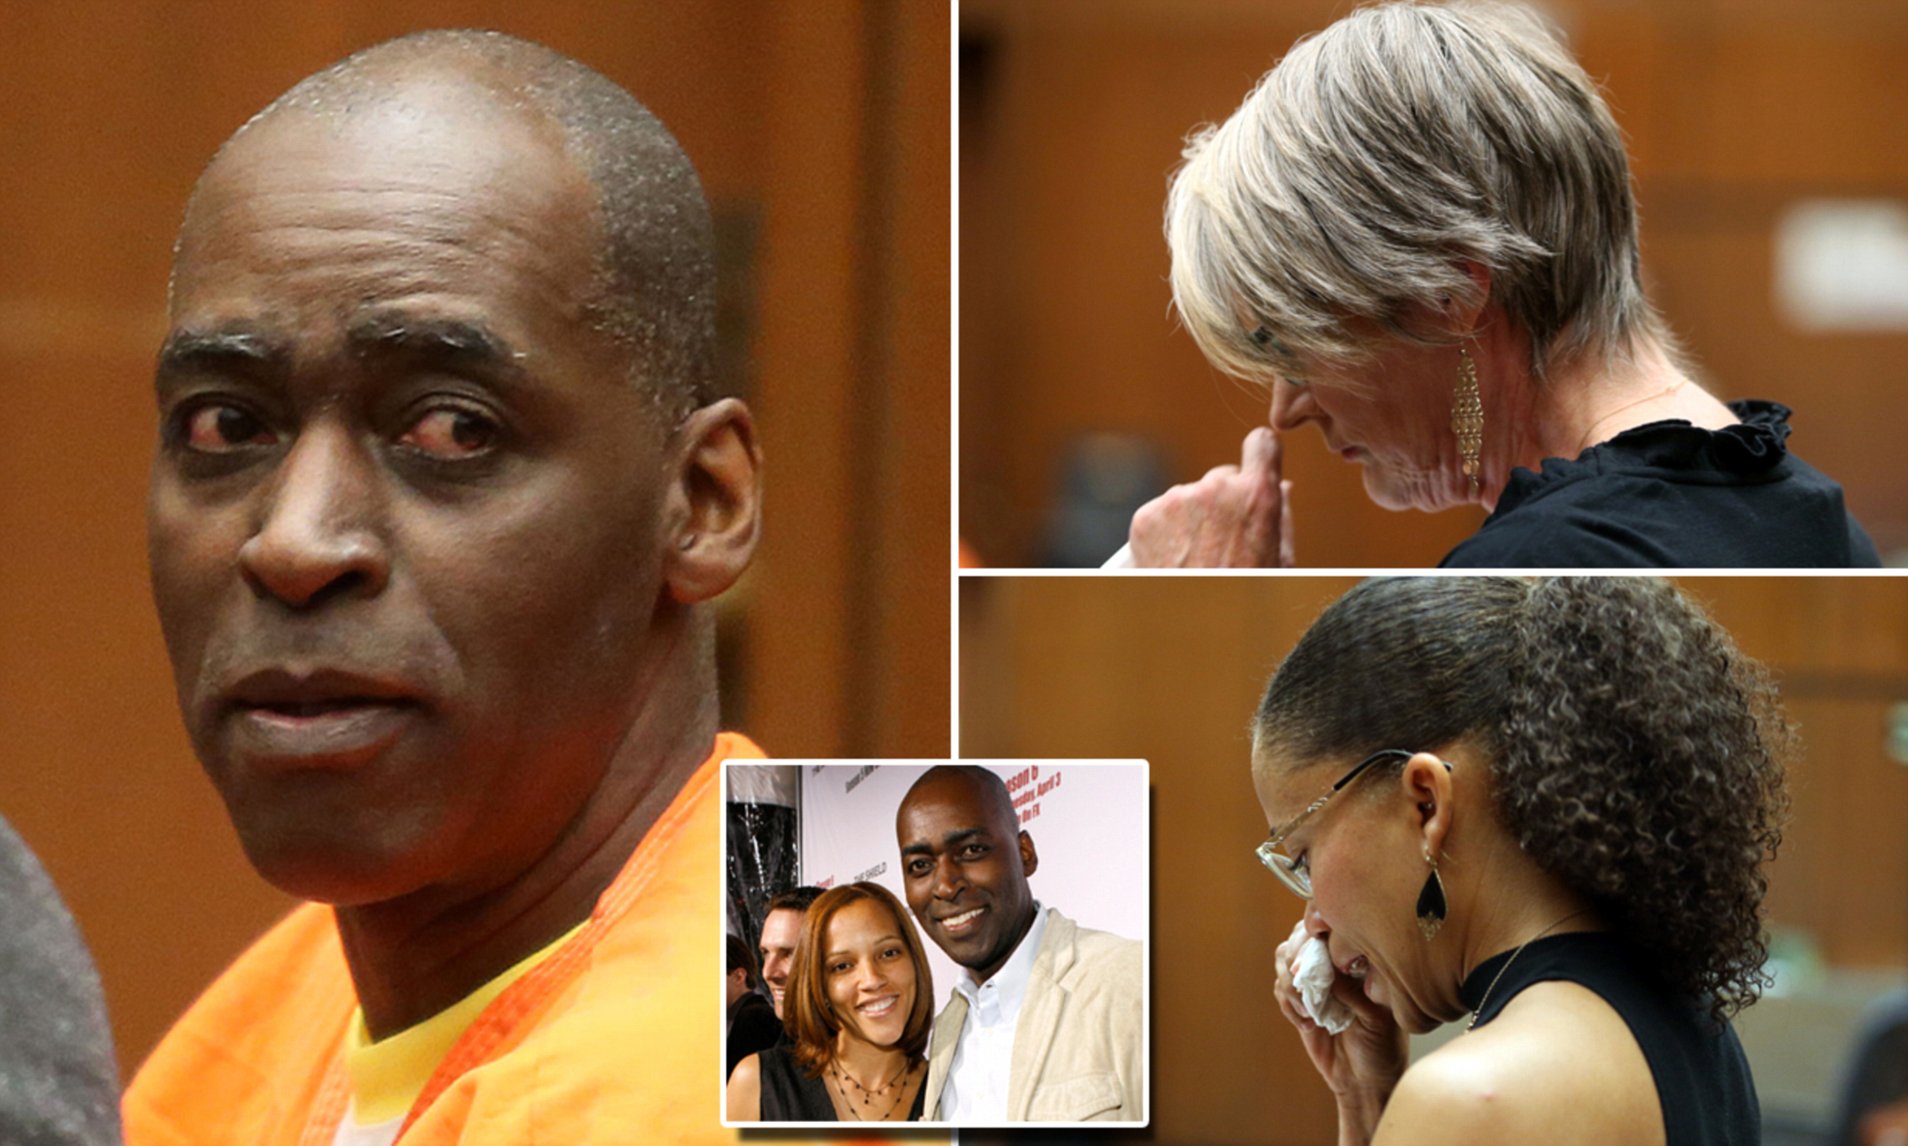 The Shield Actor Michael Jace Sentenced 40 Years after Horrible Day Leaving His 2 Kids Motherless in 2014!